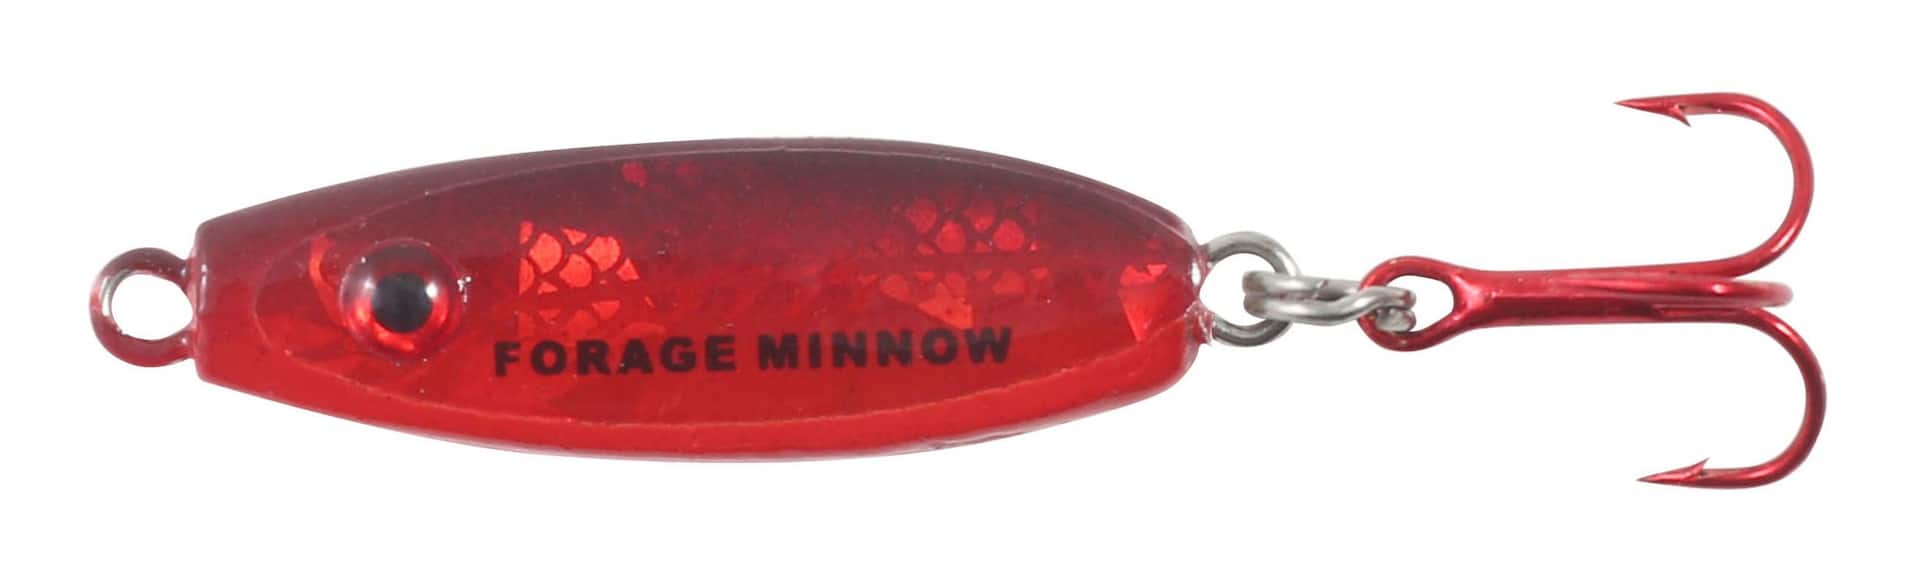 https://media-www.canadiantire.ca/product/playing/fishing/ice-fishing/0781864/forage-minnow-spoon-1-card-1-8-12-hook-super-glo-redfish-496bace9-9151-4c8c-b786-35975b933817-jpgrendition.jpg